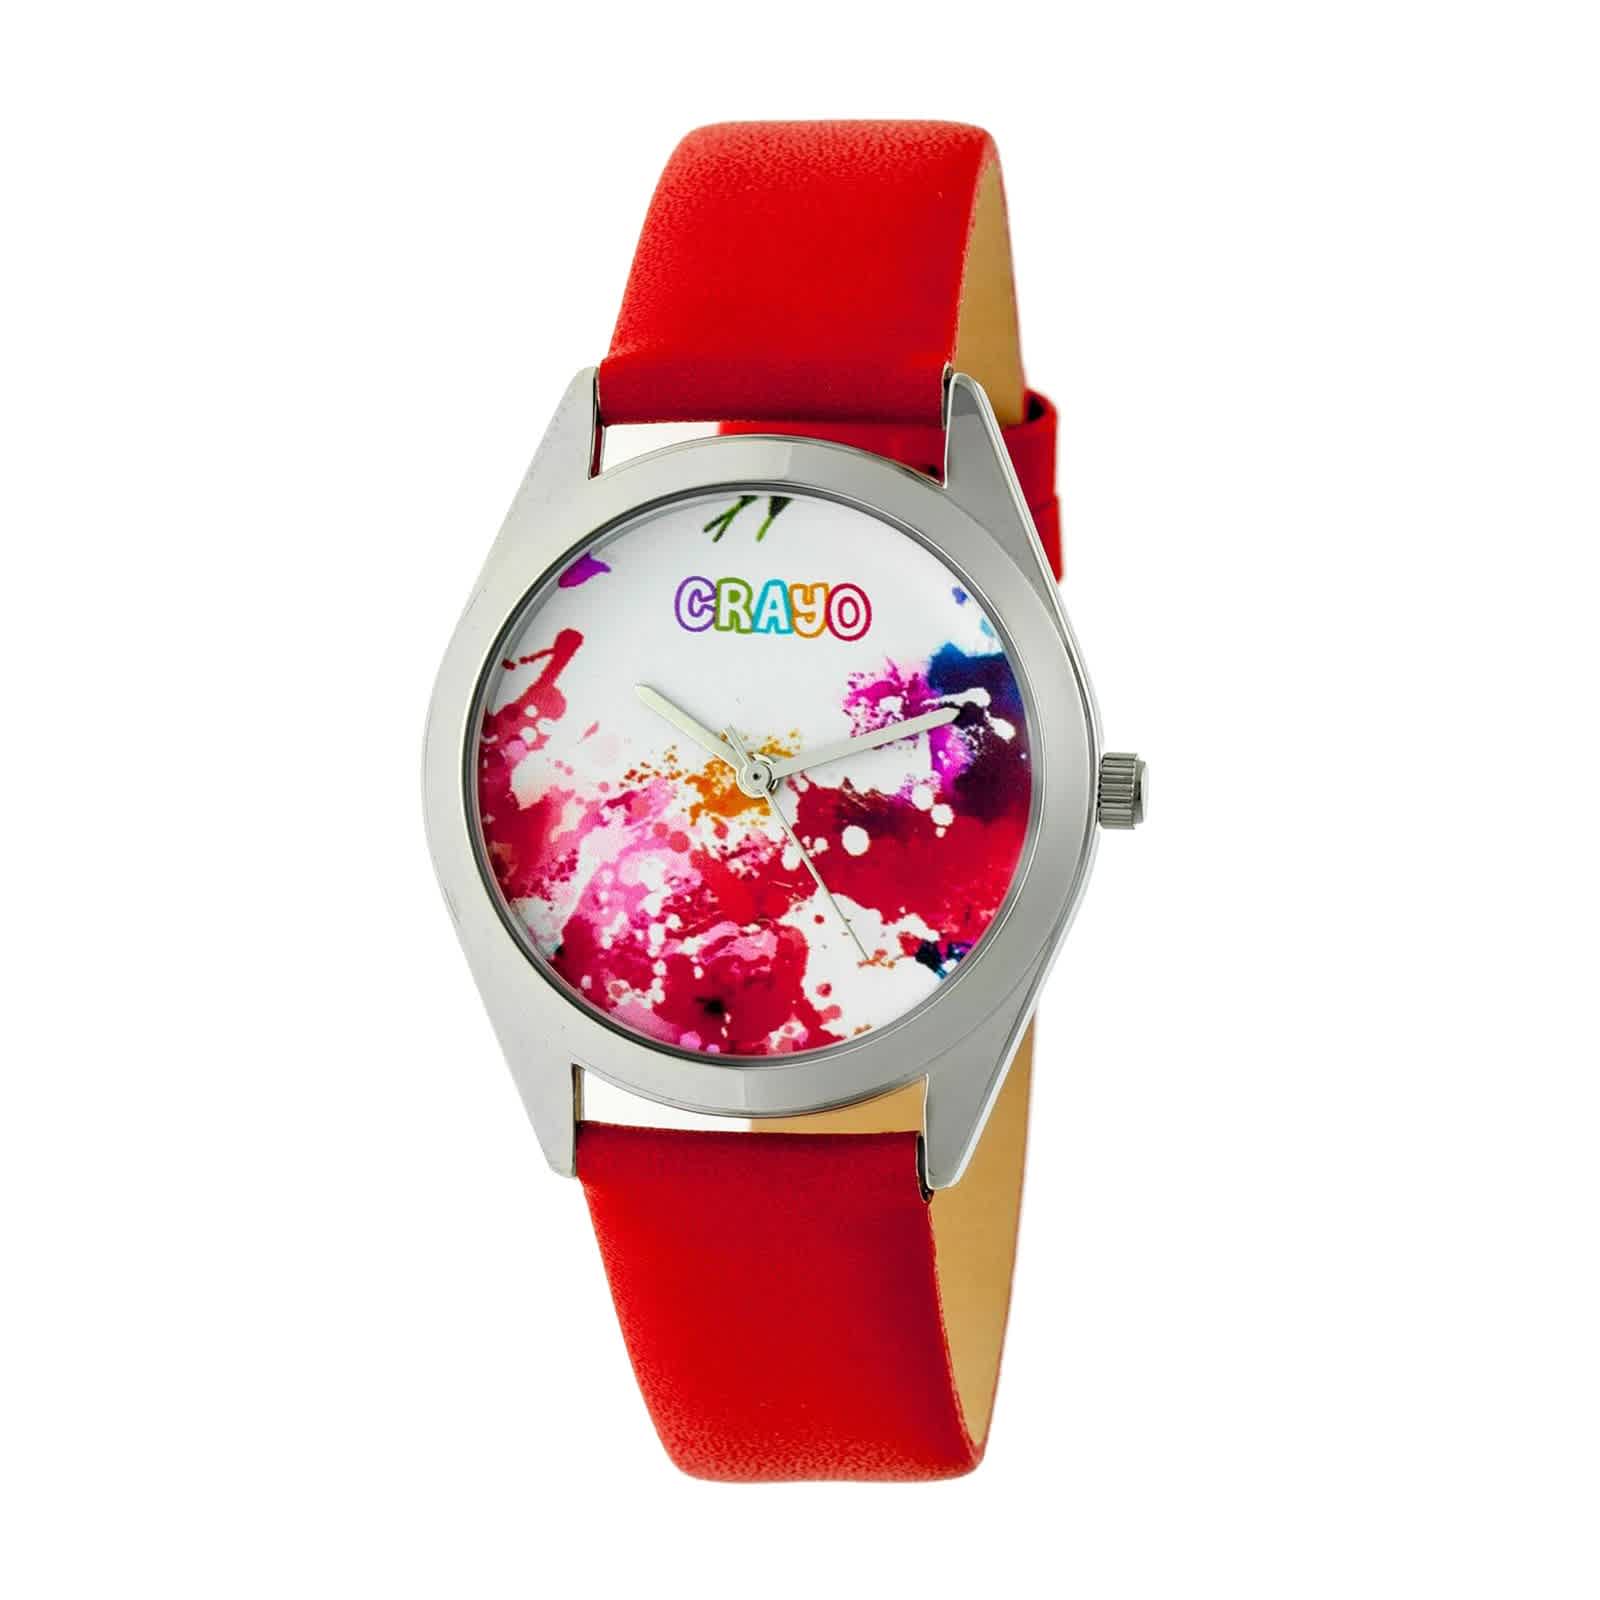 Crayo Graffiti Dial Red Leather Watch Cracr4002